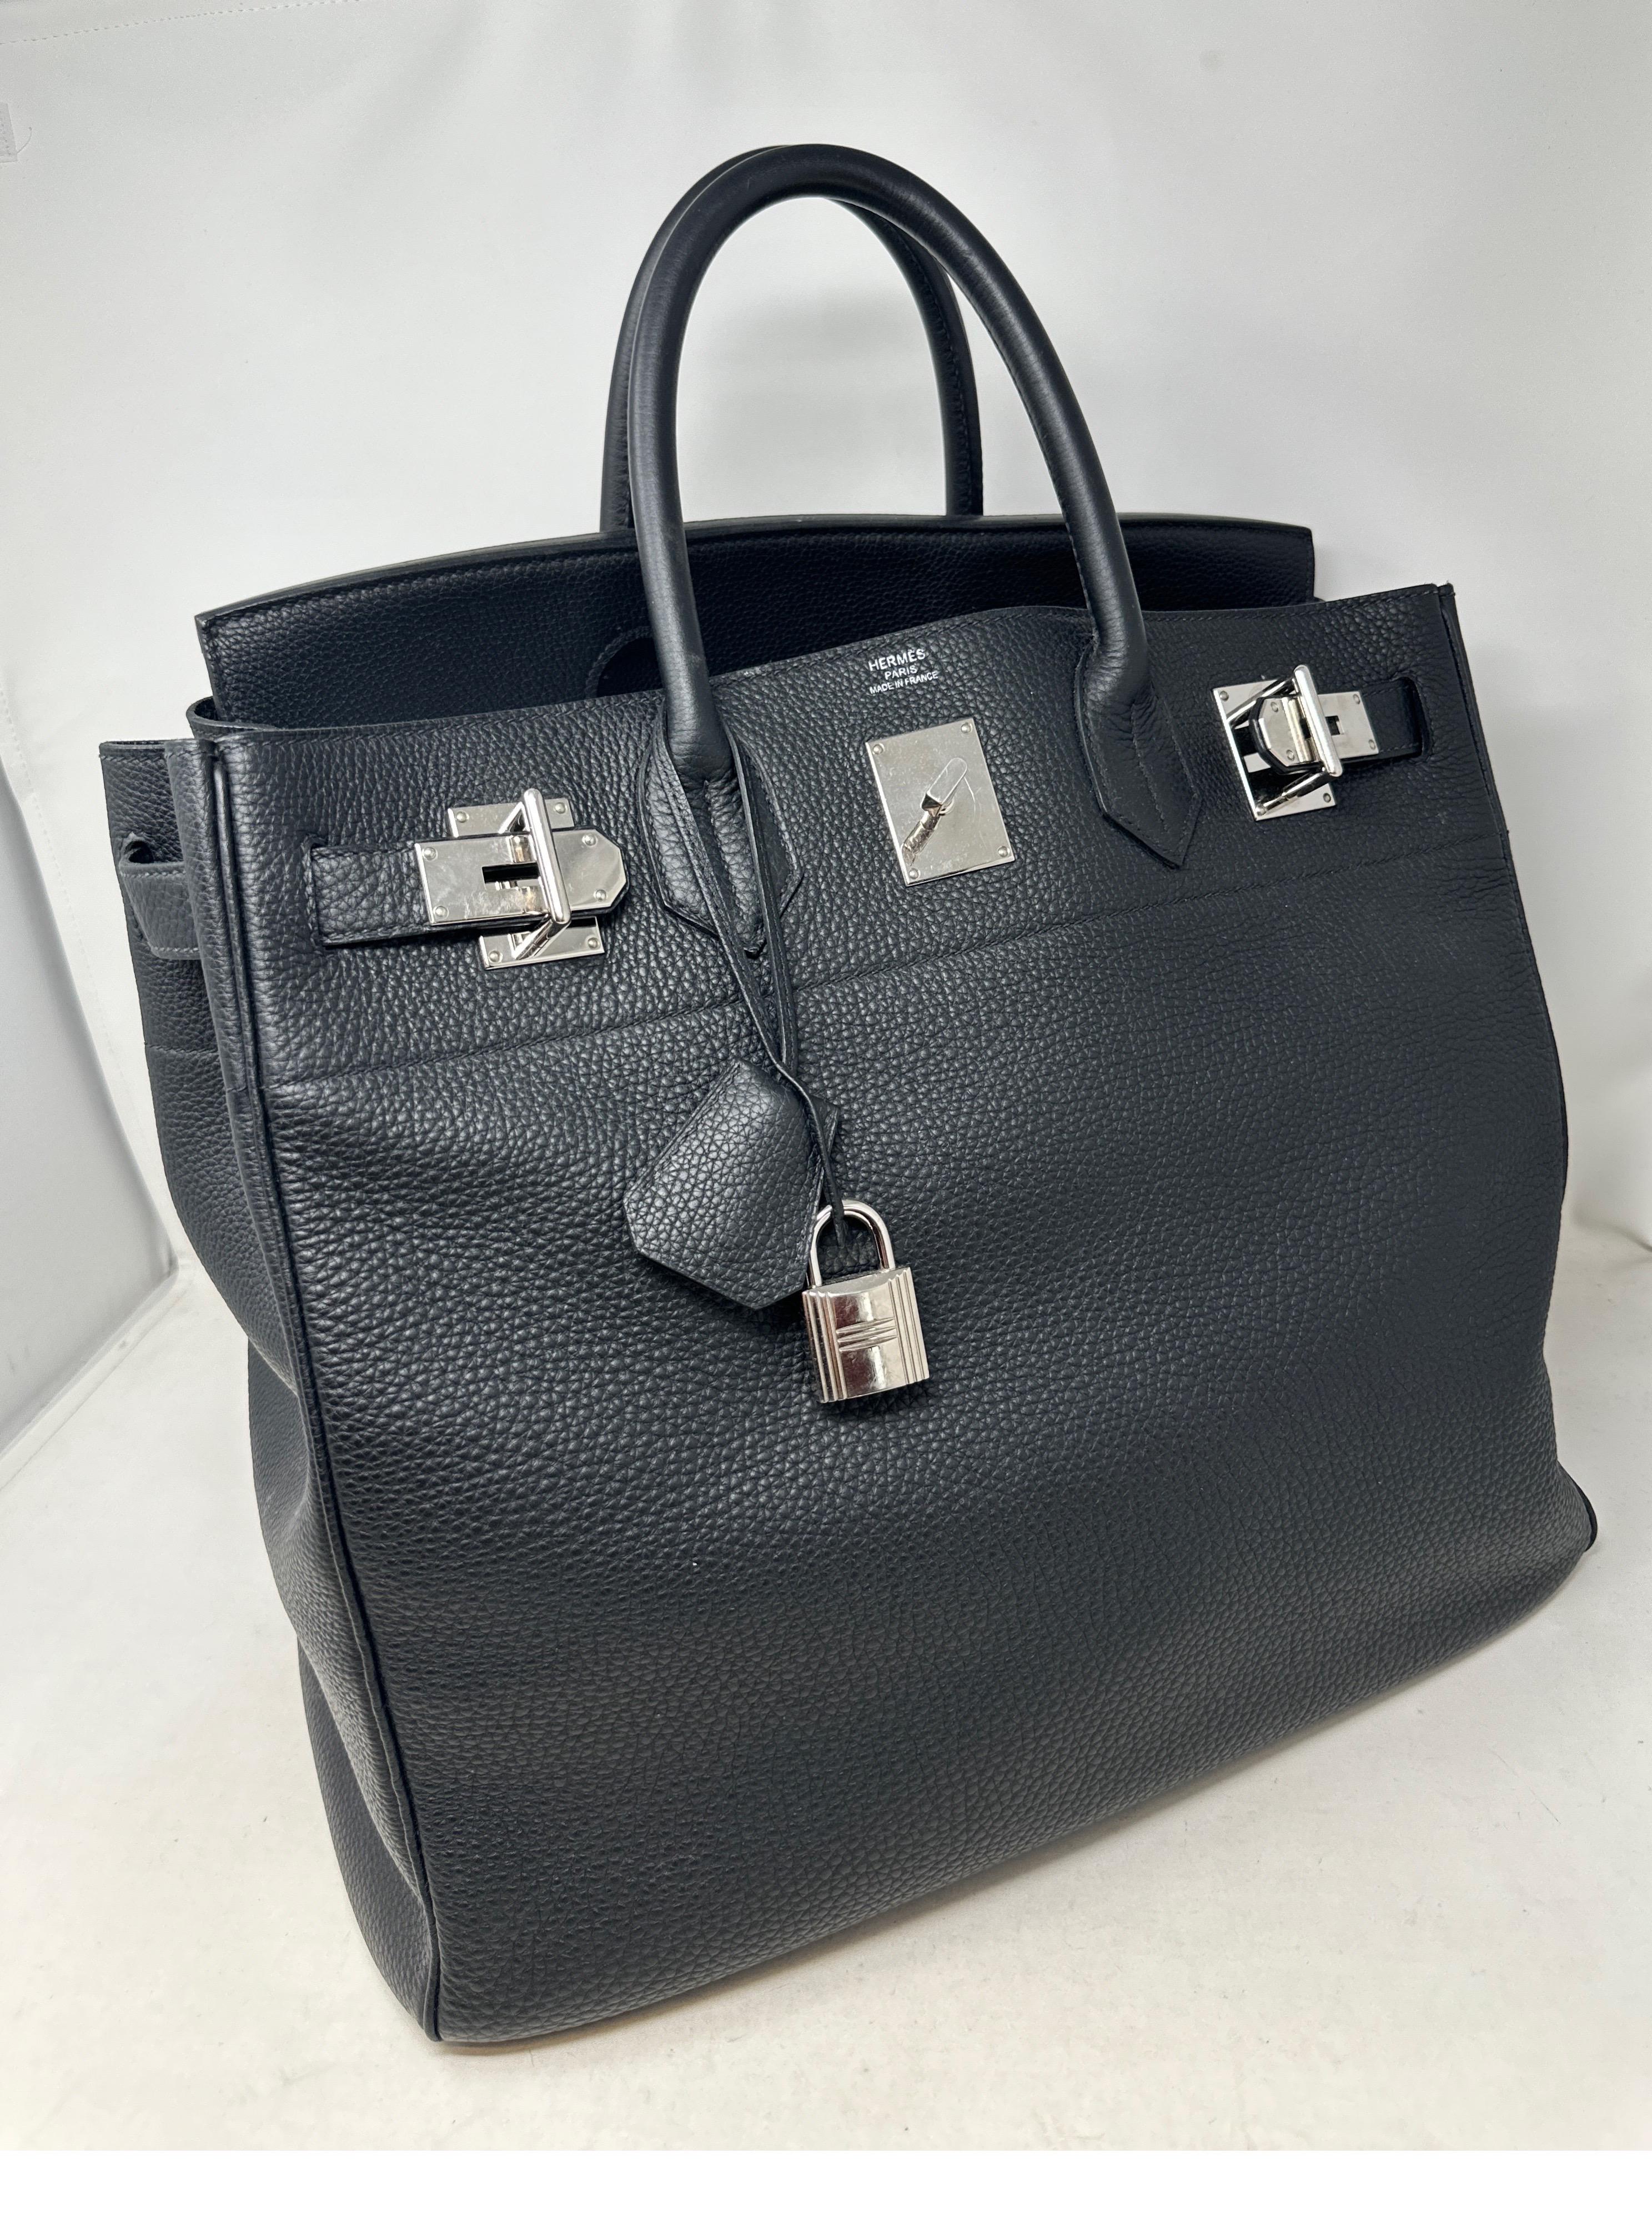 Hermes Black HAC 40 Bag  In Excellent Condition For Sale In Athens, GA